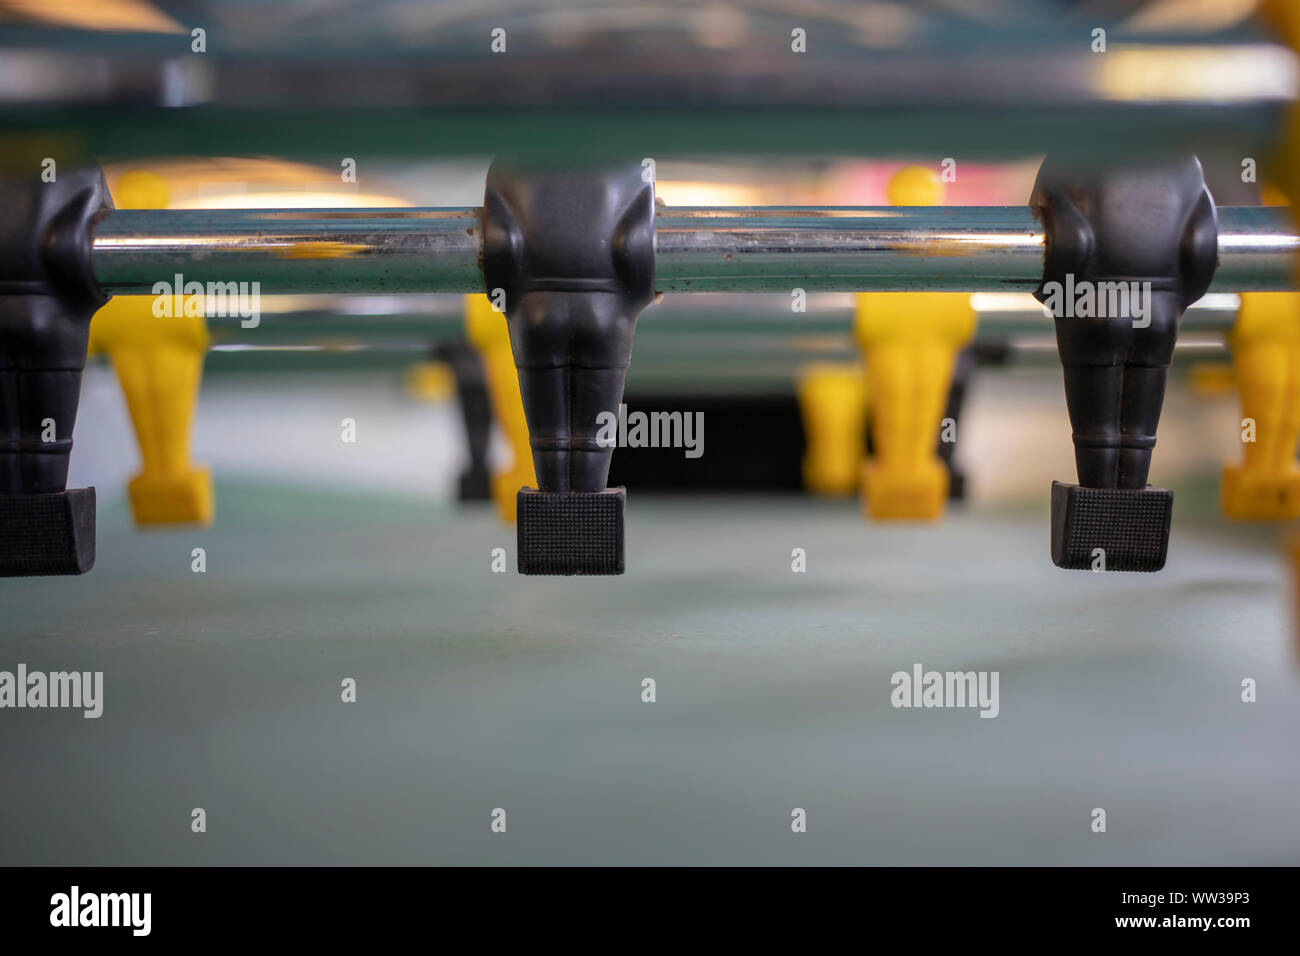 Close-up of a football table with yellow and black figures Stock Photo